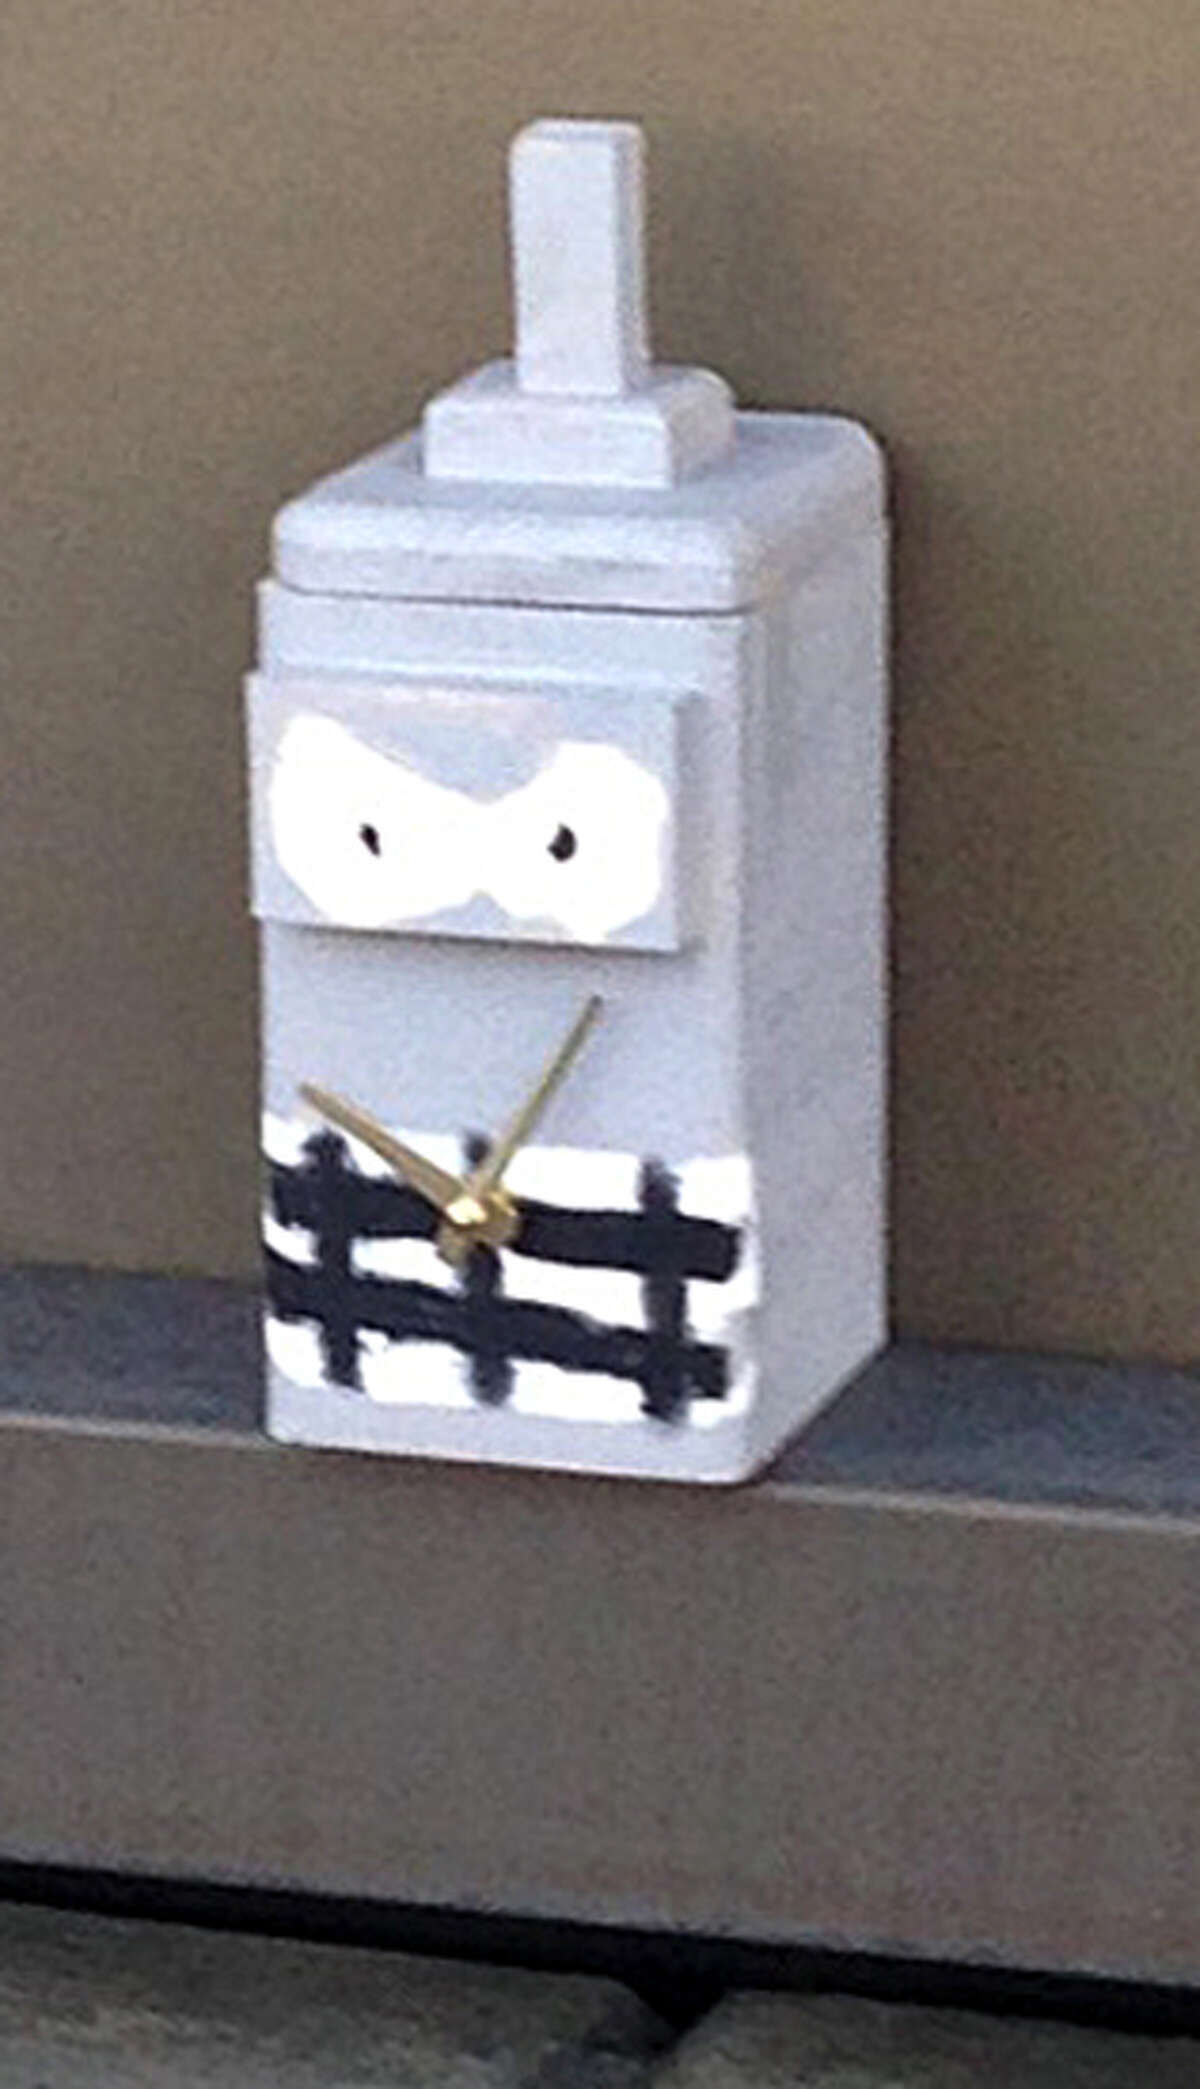 This suspicious box with a smiling face and clock hands discovered on the Unquowa Road overpass near the railroad tracks in Fairfield Conn. caused Metro-North to shut down service in the area, resulting in hours of delays on the New Haven Line on Friday, June 20, 2014. The box was determined to not be a bomb, but a student project.